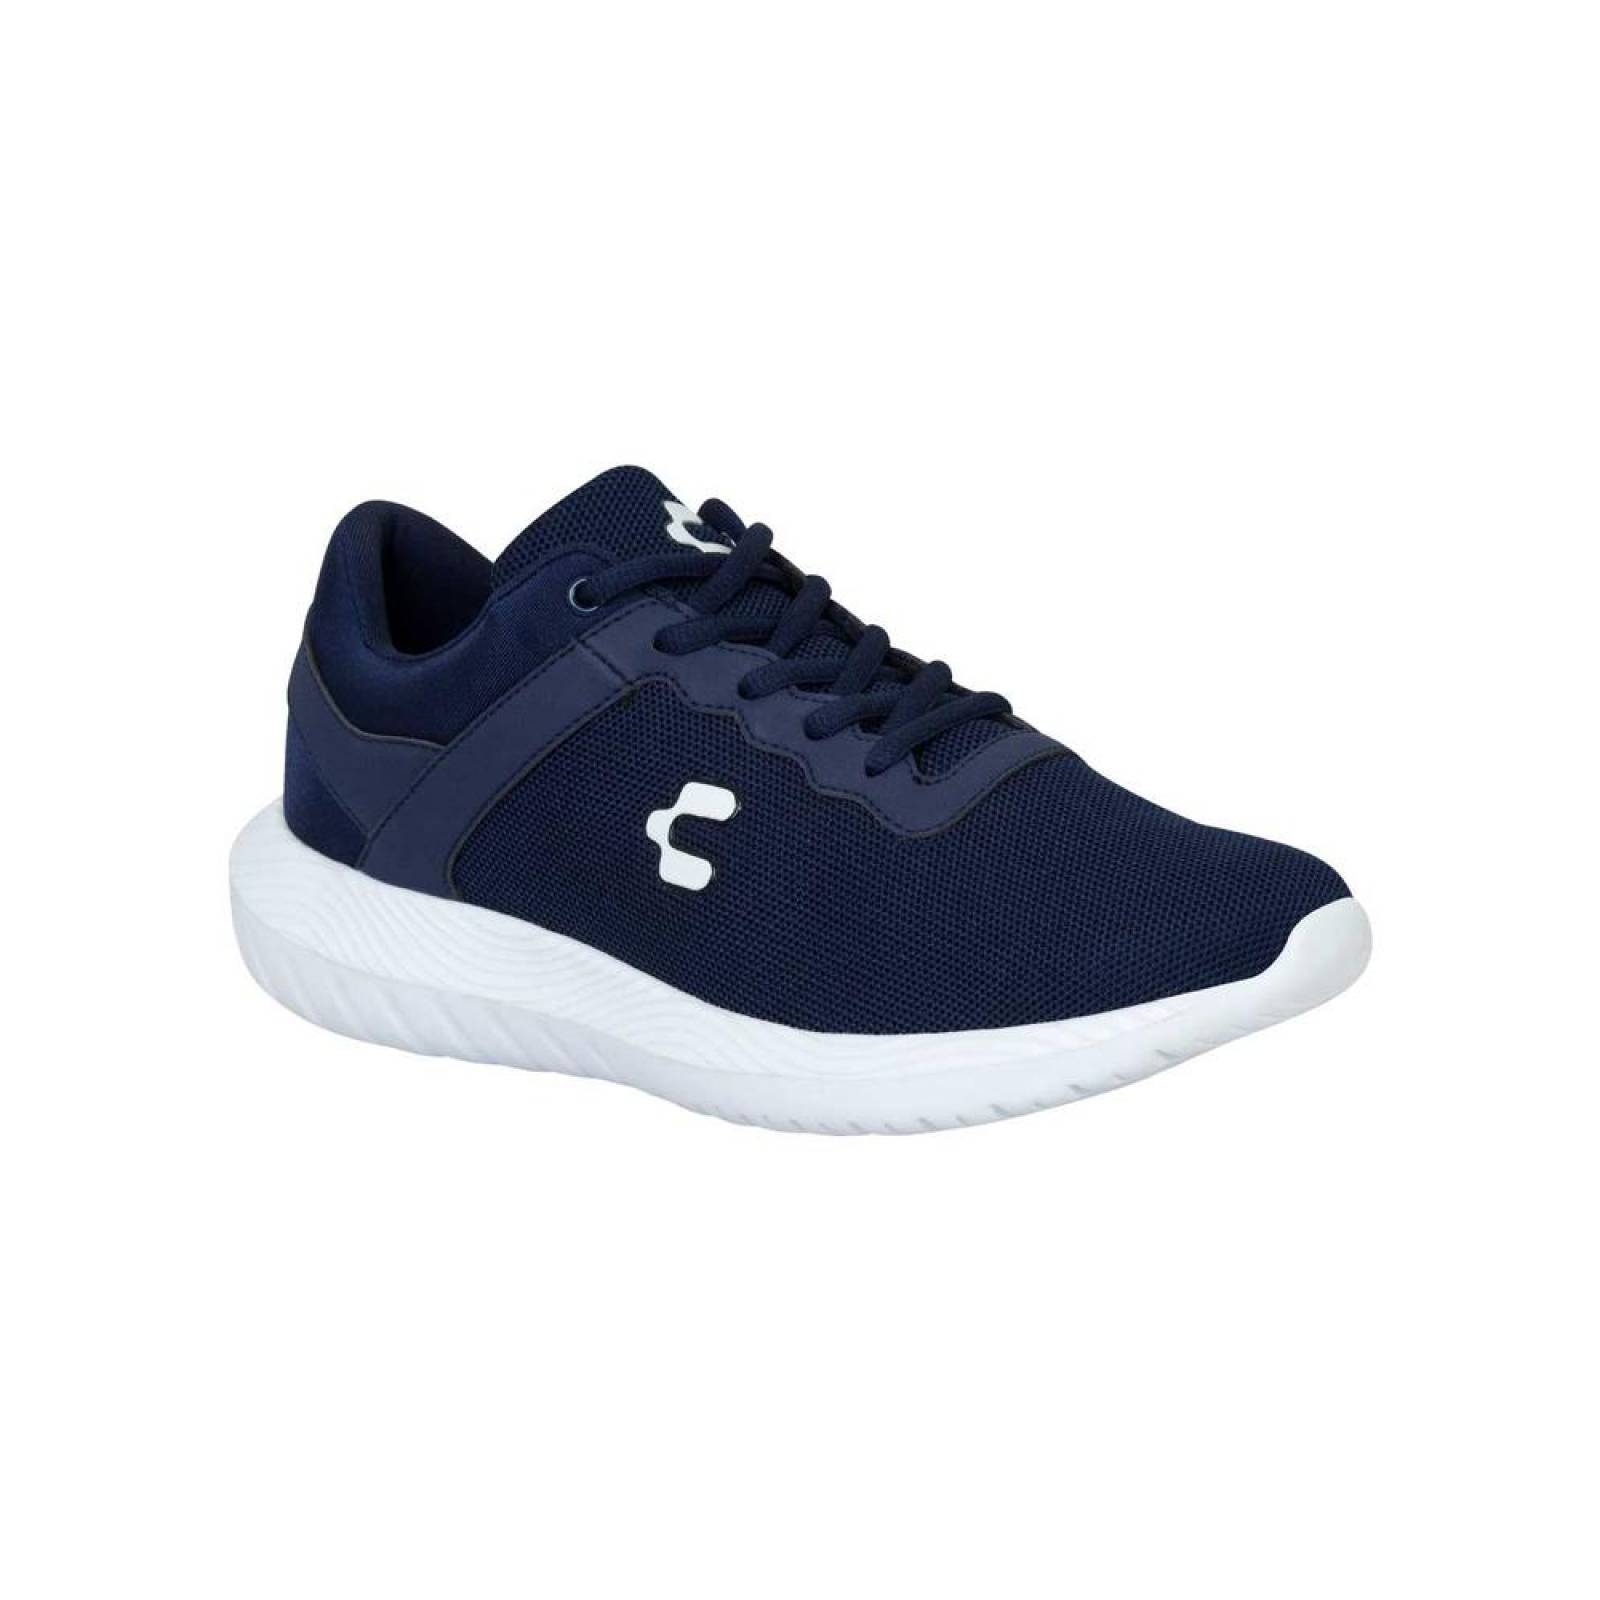 TENIS CHARLY HOMBRE AZUL TEXTIL 1029501001 